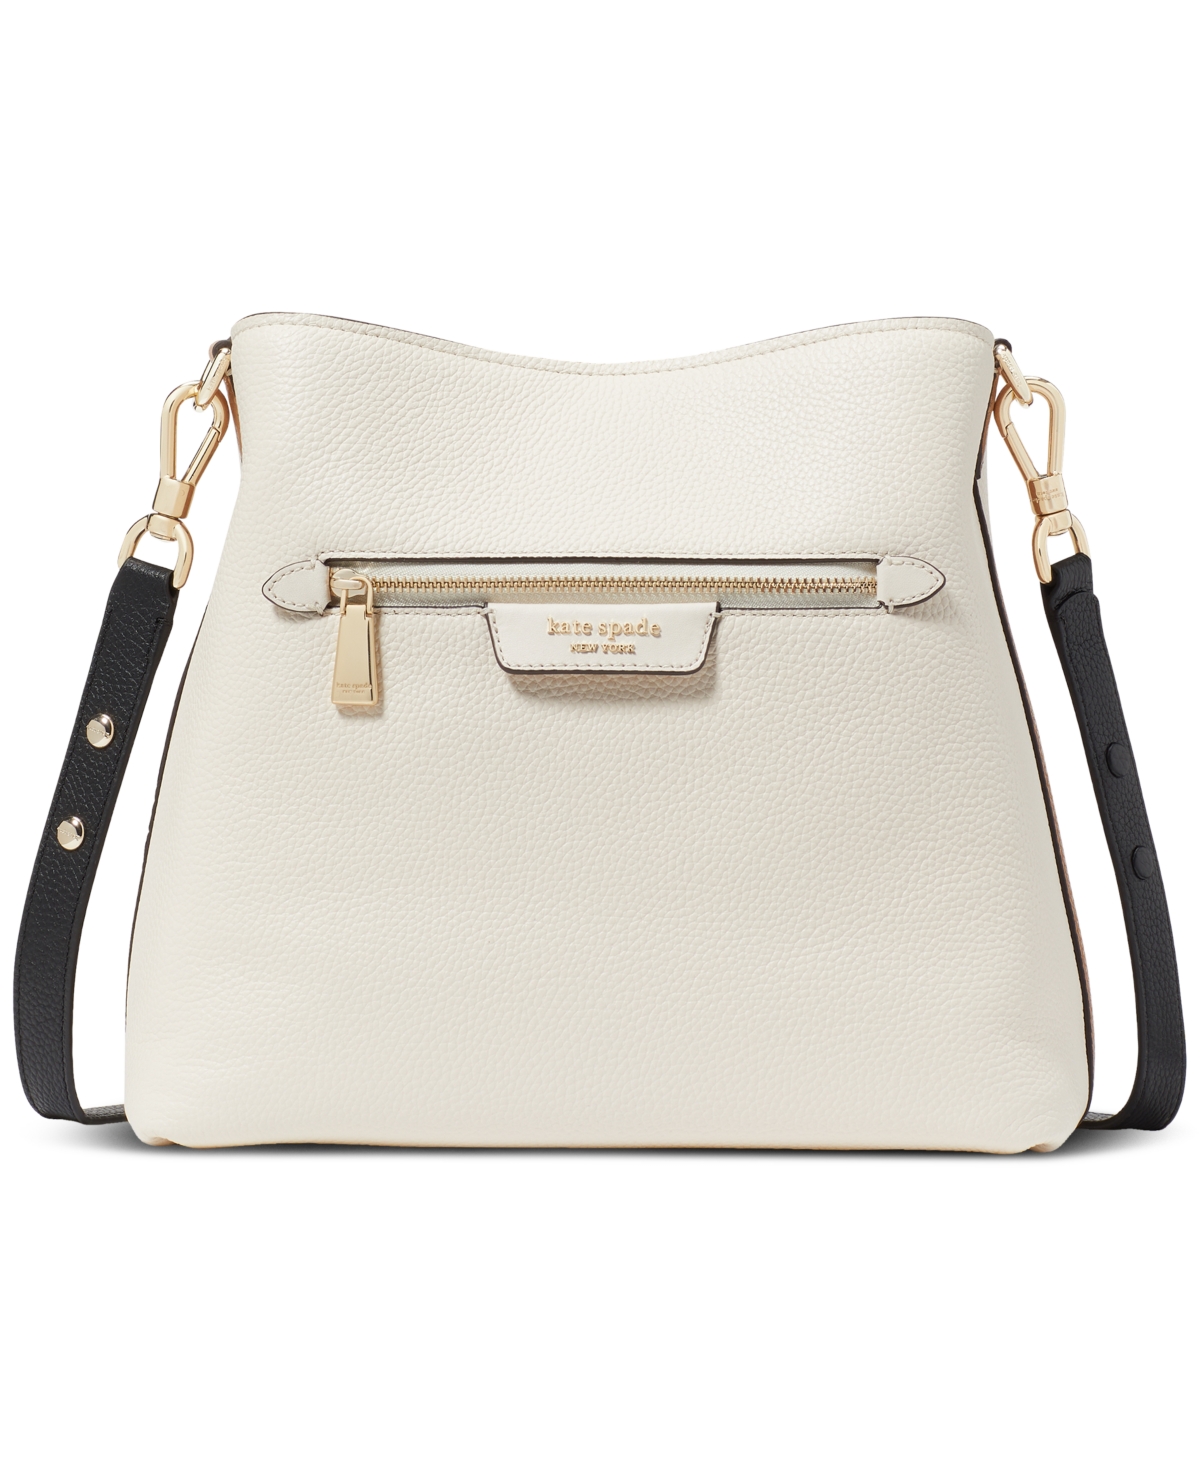 Kate Spade Hudson Colorblocked Pebbled Leather Small Shoulder Bag In Parchment